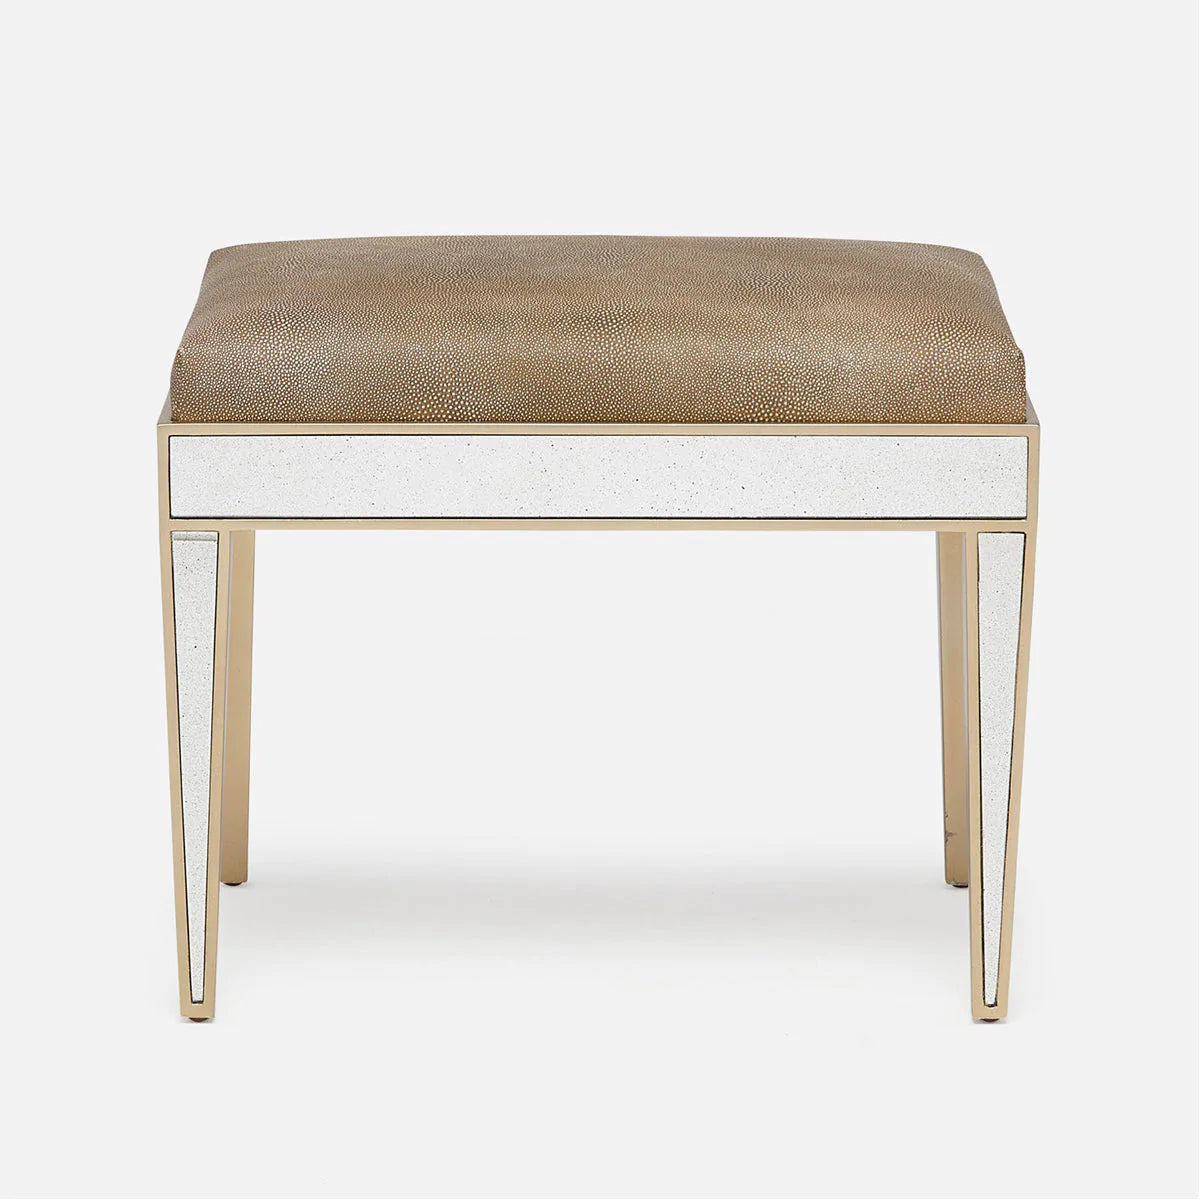 Made Goods Mia Upholstered Mirrored Single Bench in Rhone Leather